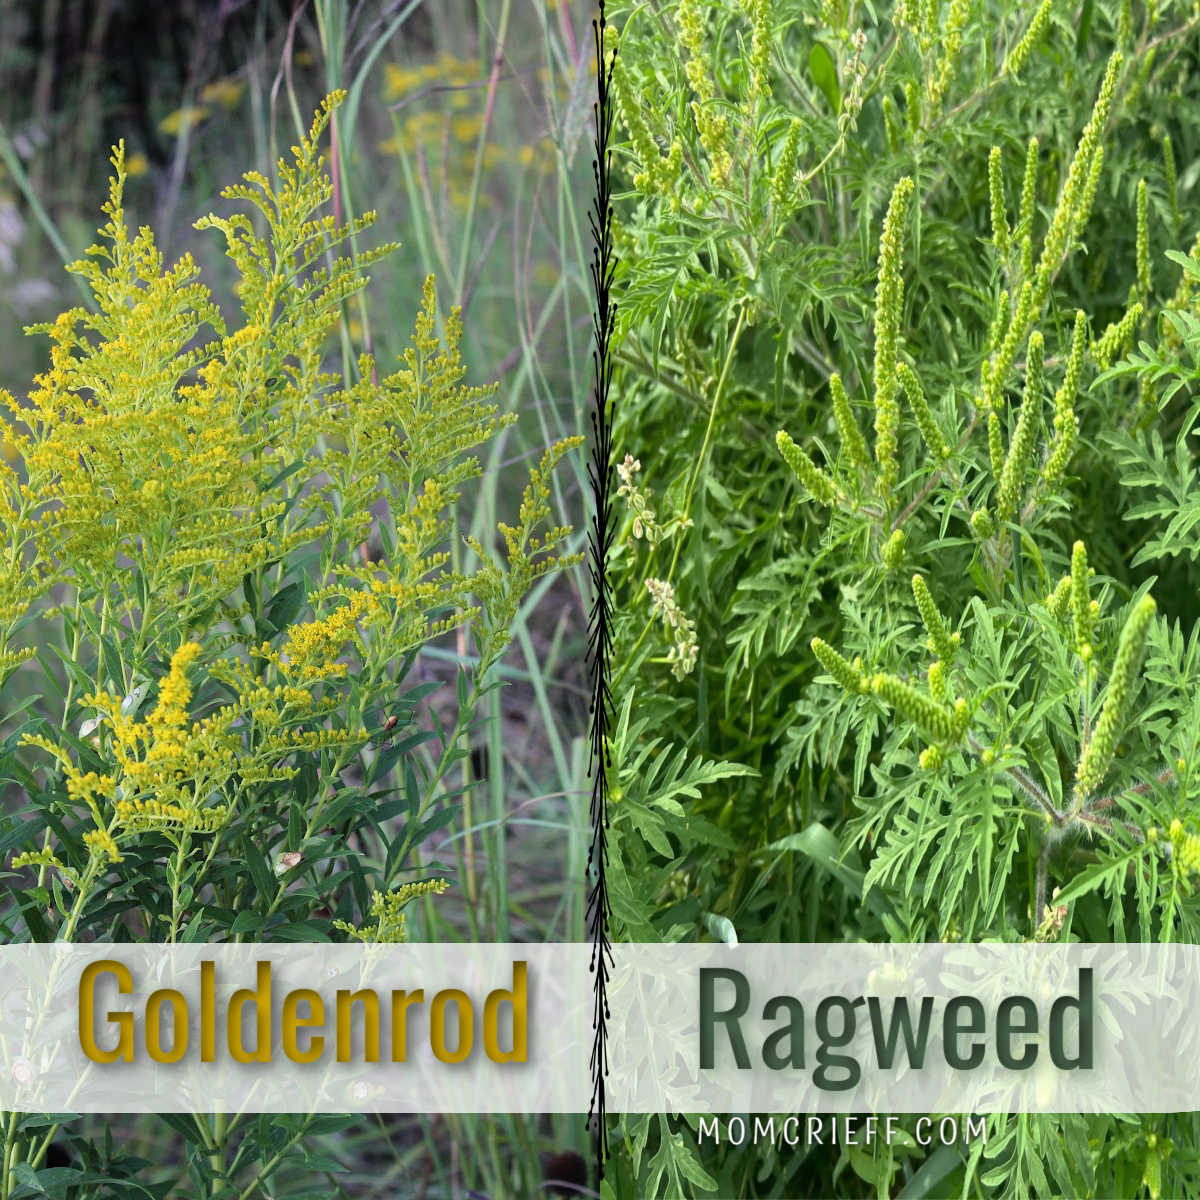 goldenrod picture on the left and raweed image on the right.